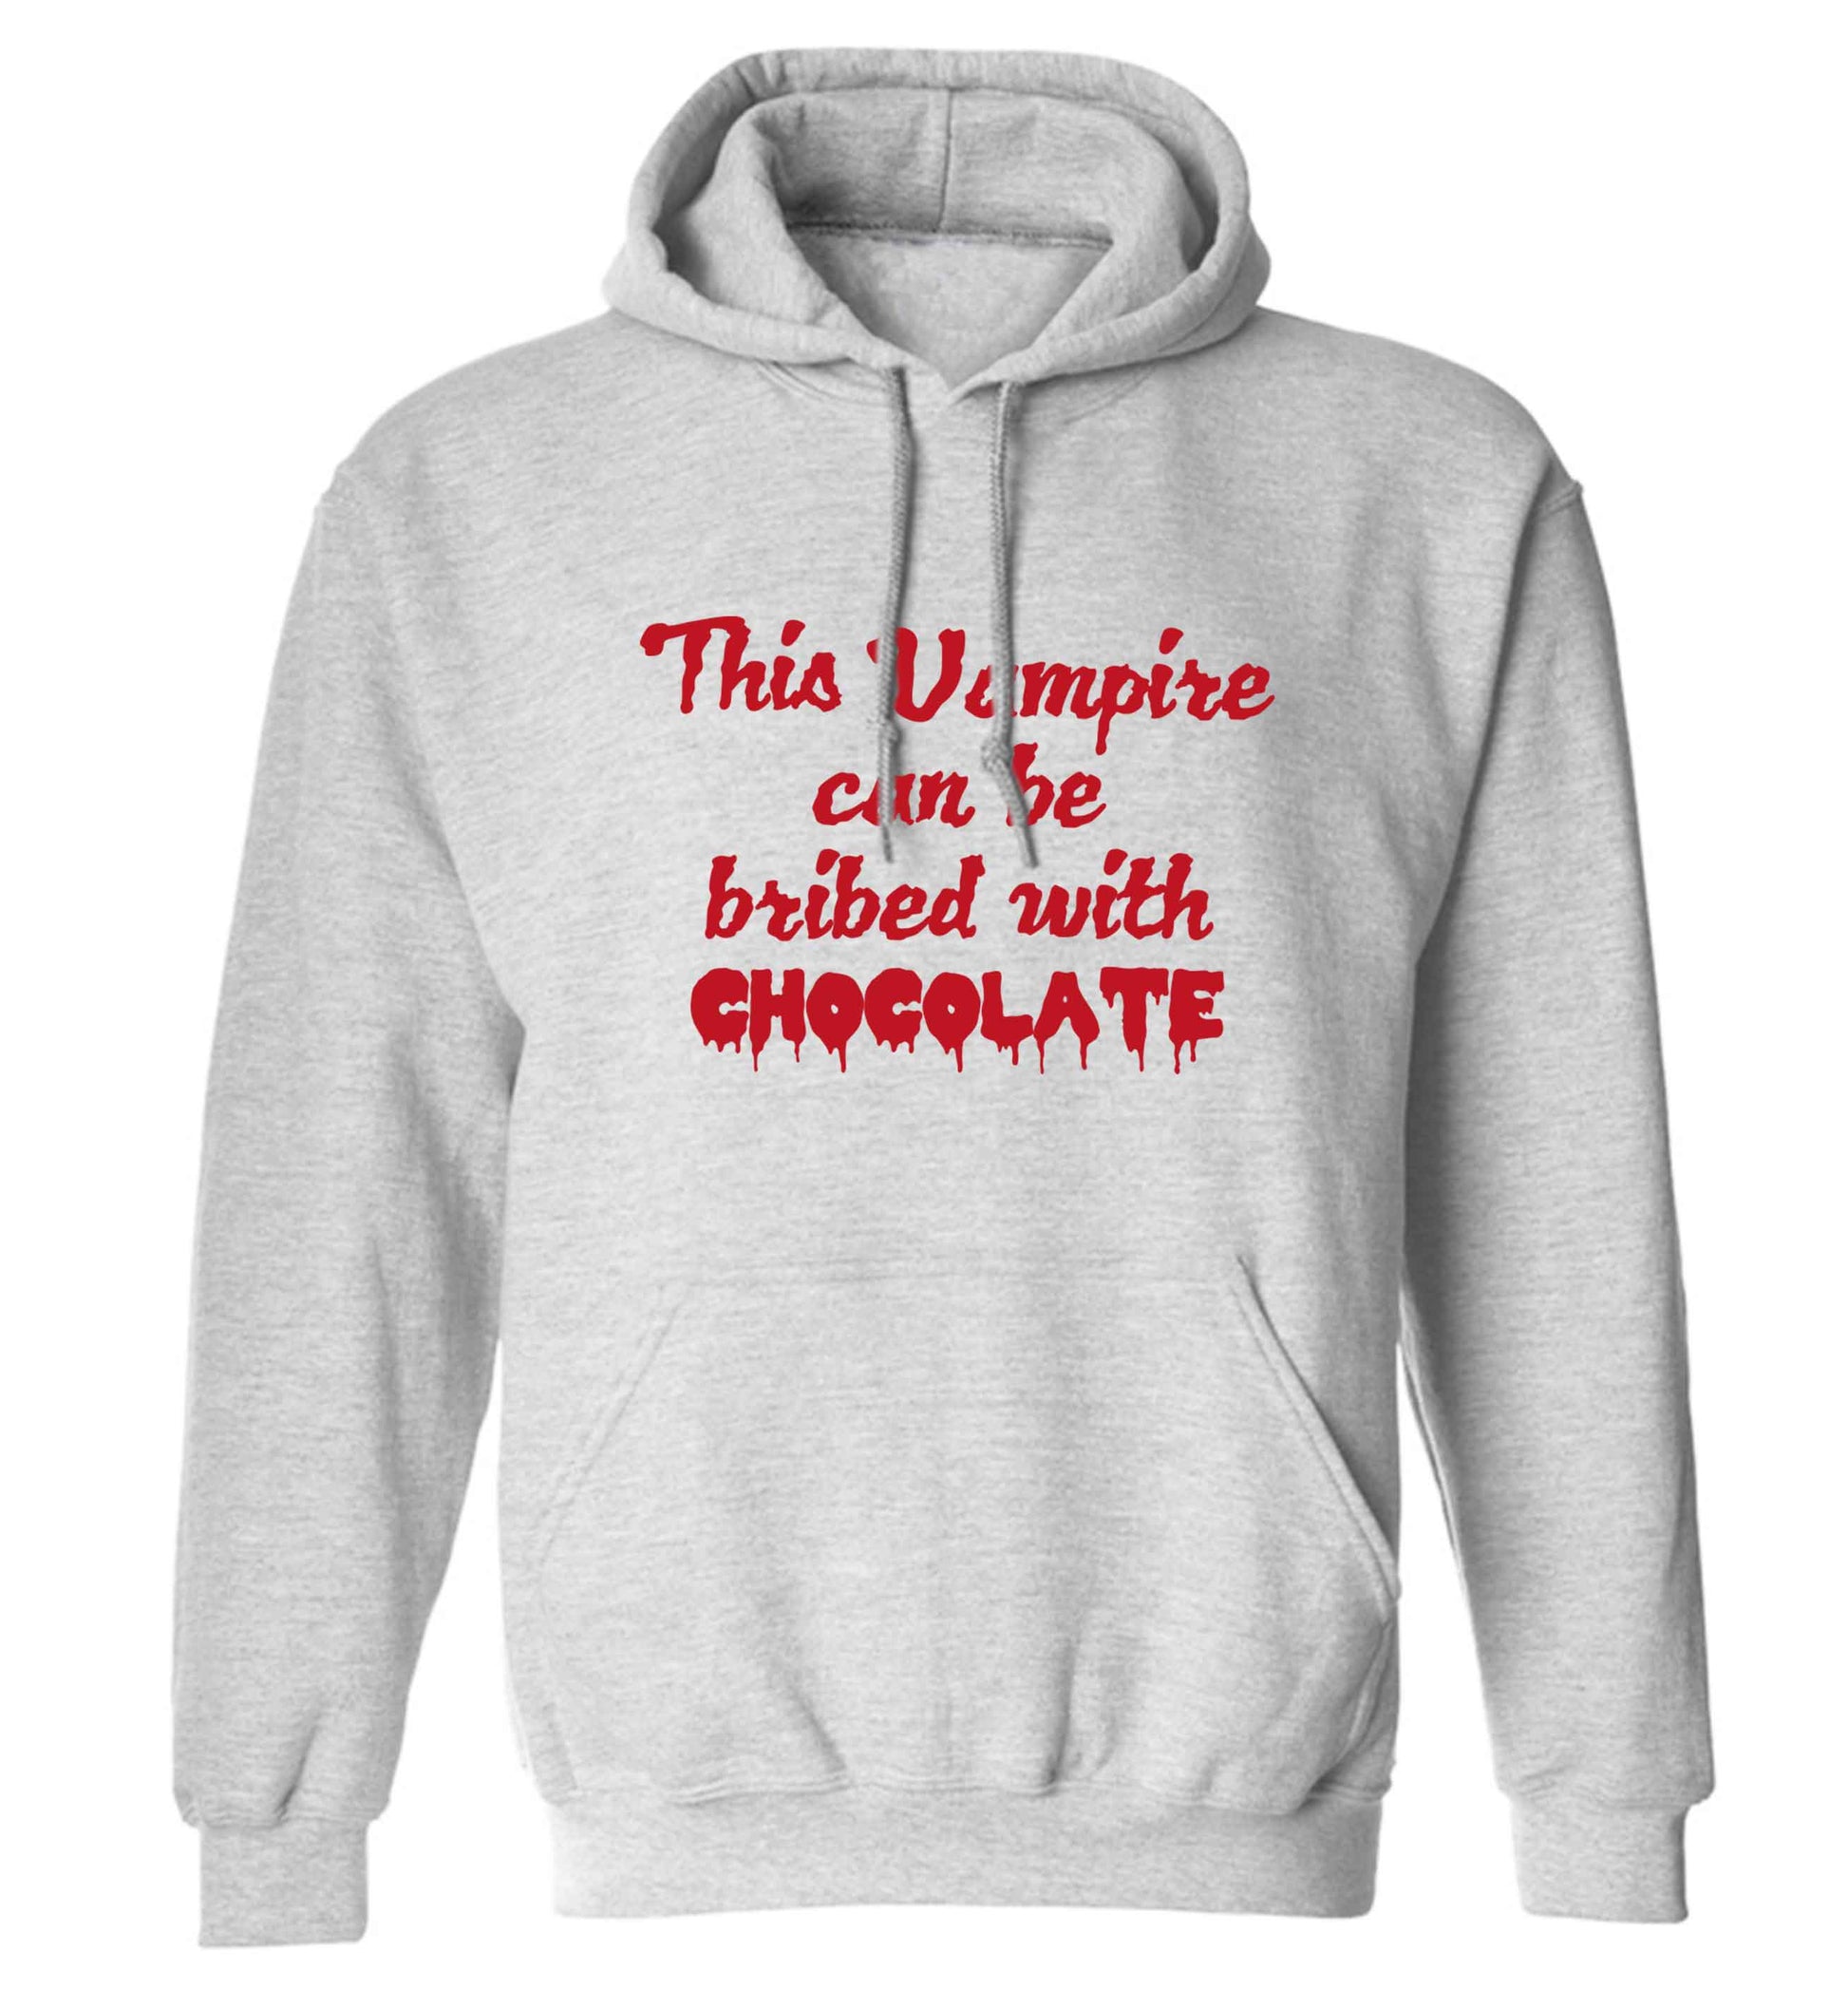 This vampire can be bribed with chocolate adults unisex grey hoodie 2XL